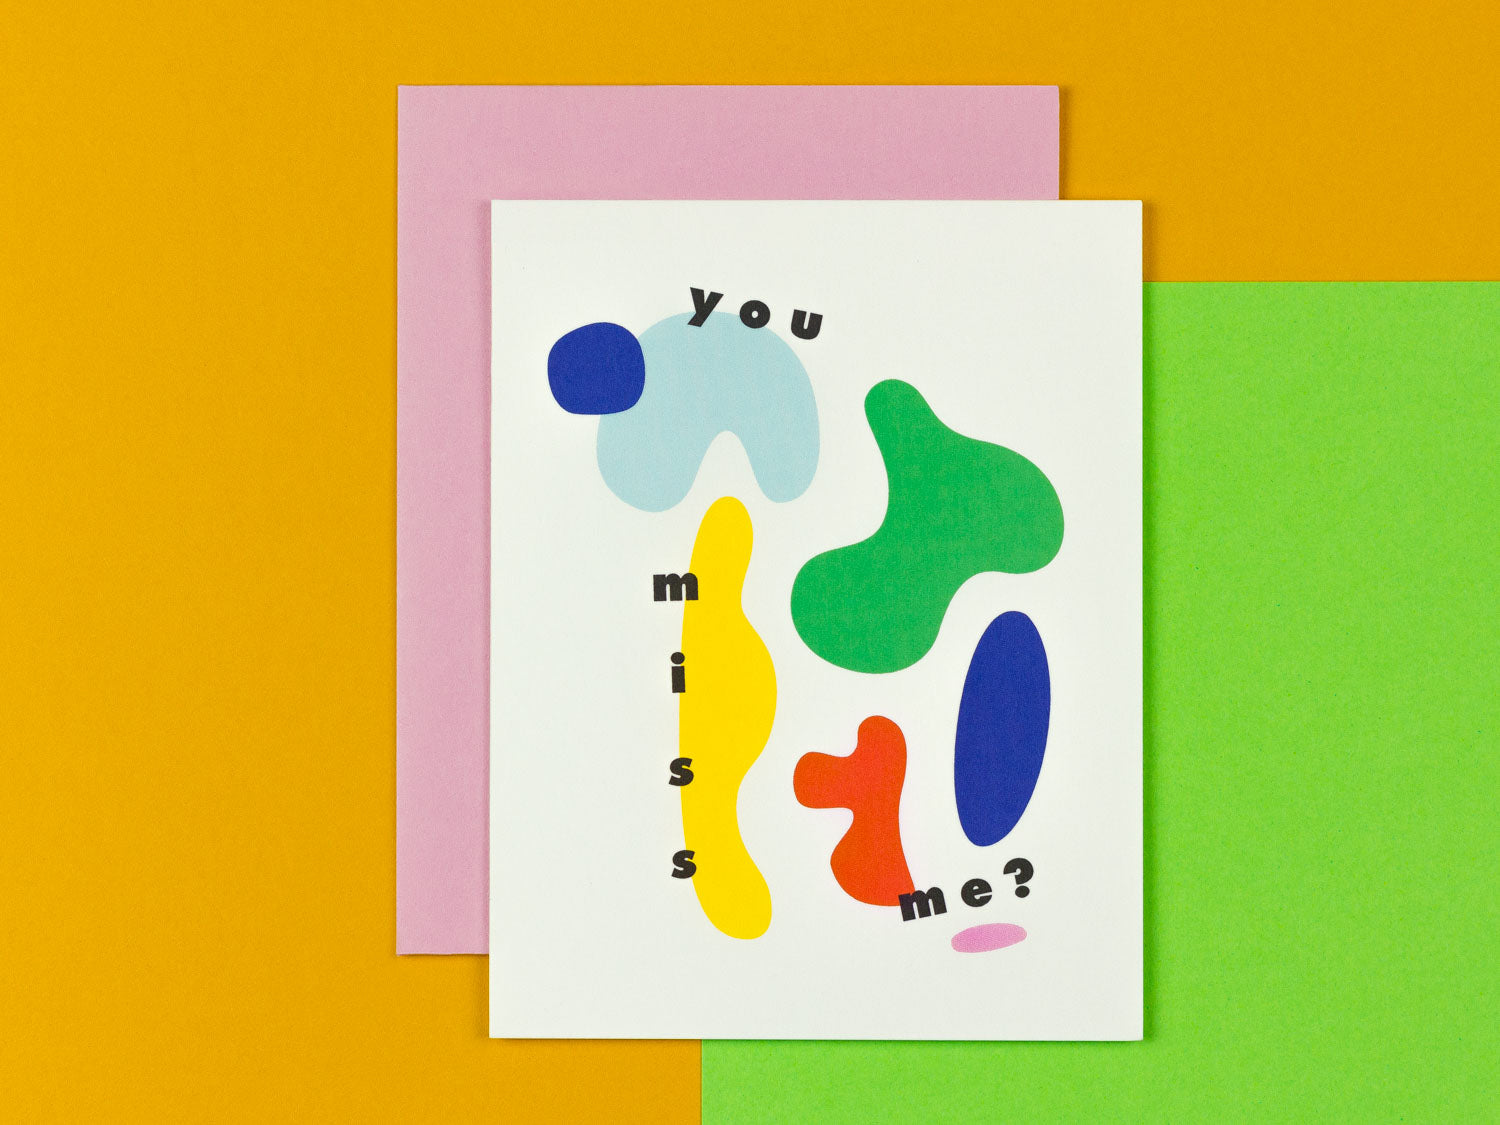 Thinking of you card with colorful abstract shapes by My Darlin' that reads You Miss Me? @mydarlin_bk